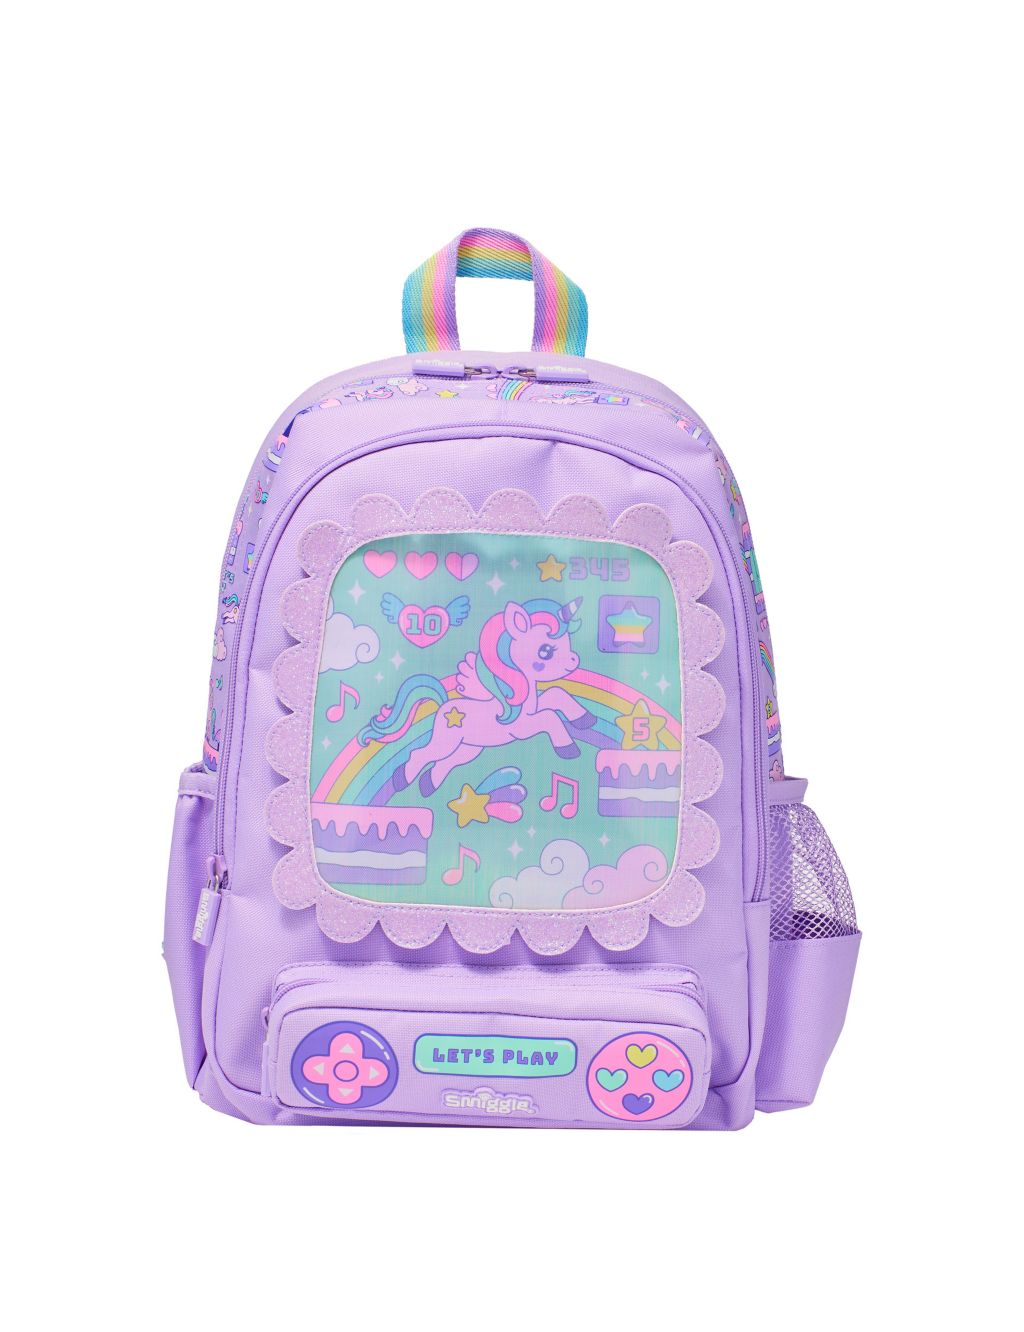 Kids' Space Backpack (3+ Yrs) image 1